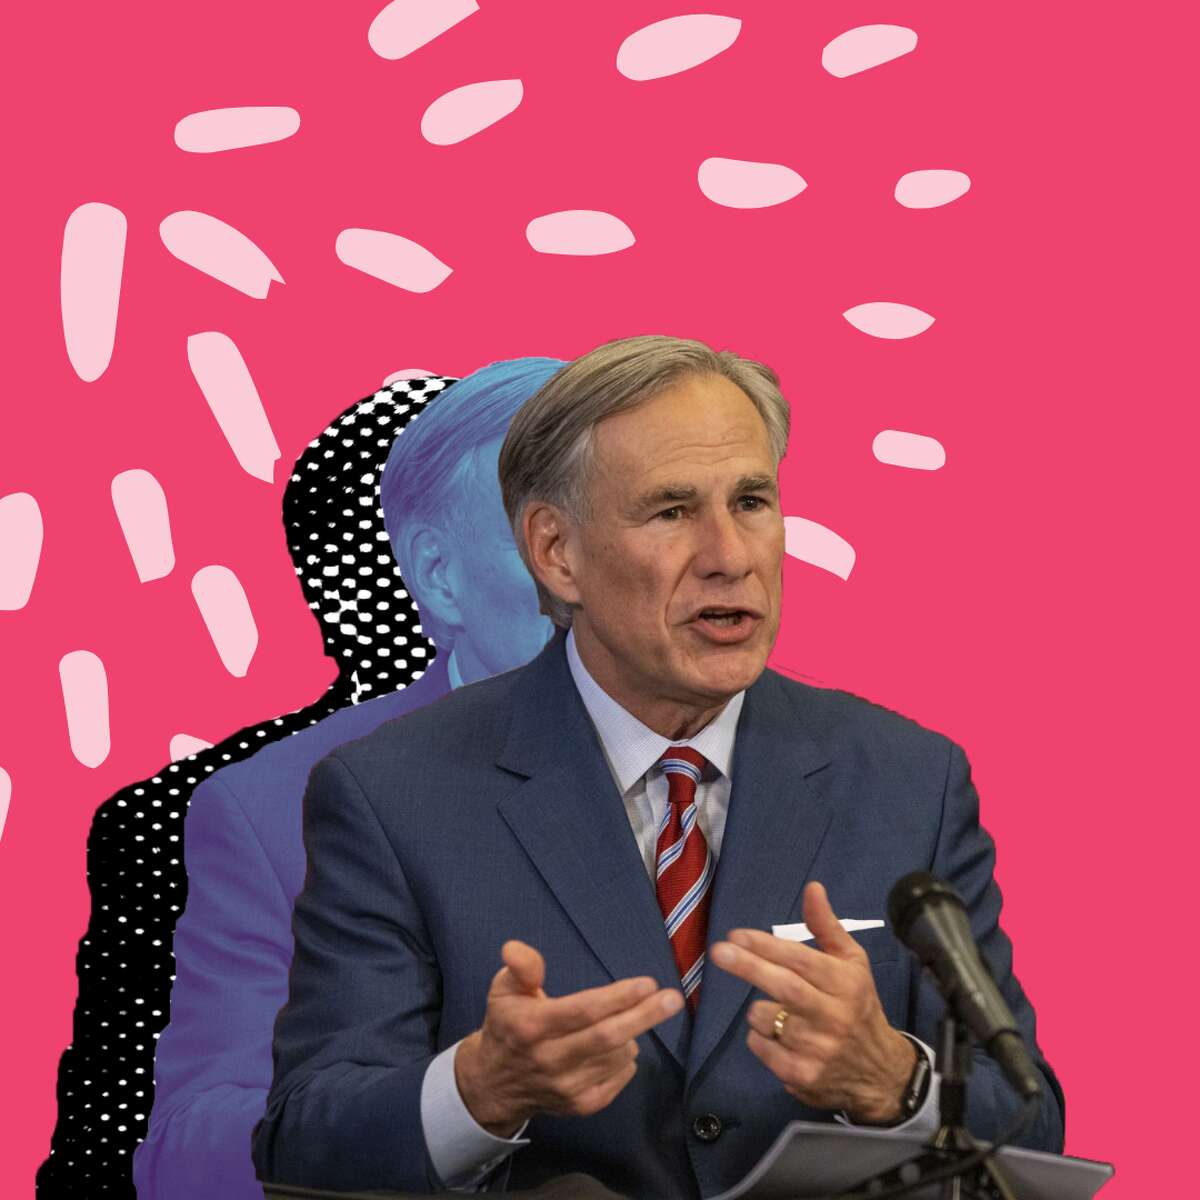 Gov. Greg Abbott has asked the Texas Restaurant Association, Texas Package Stores Association and all Texas retailers to voluntarily remove all Russian products from their shelves.